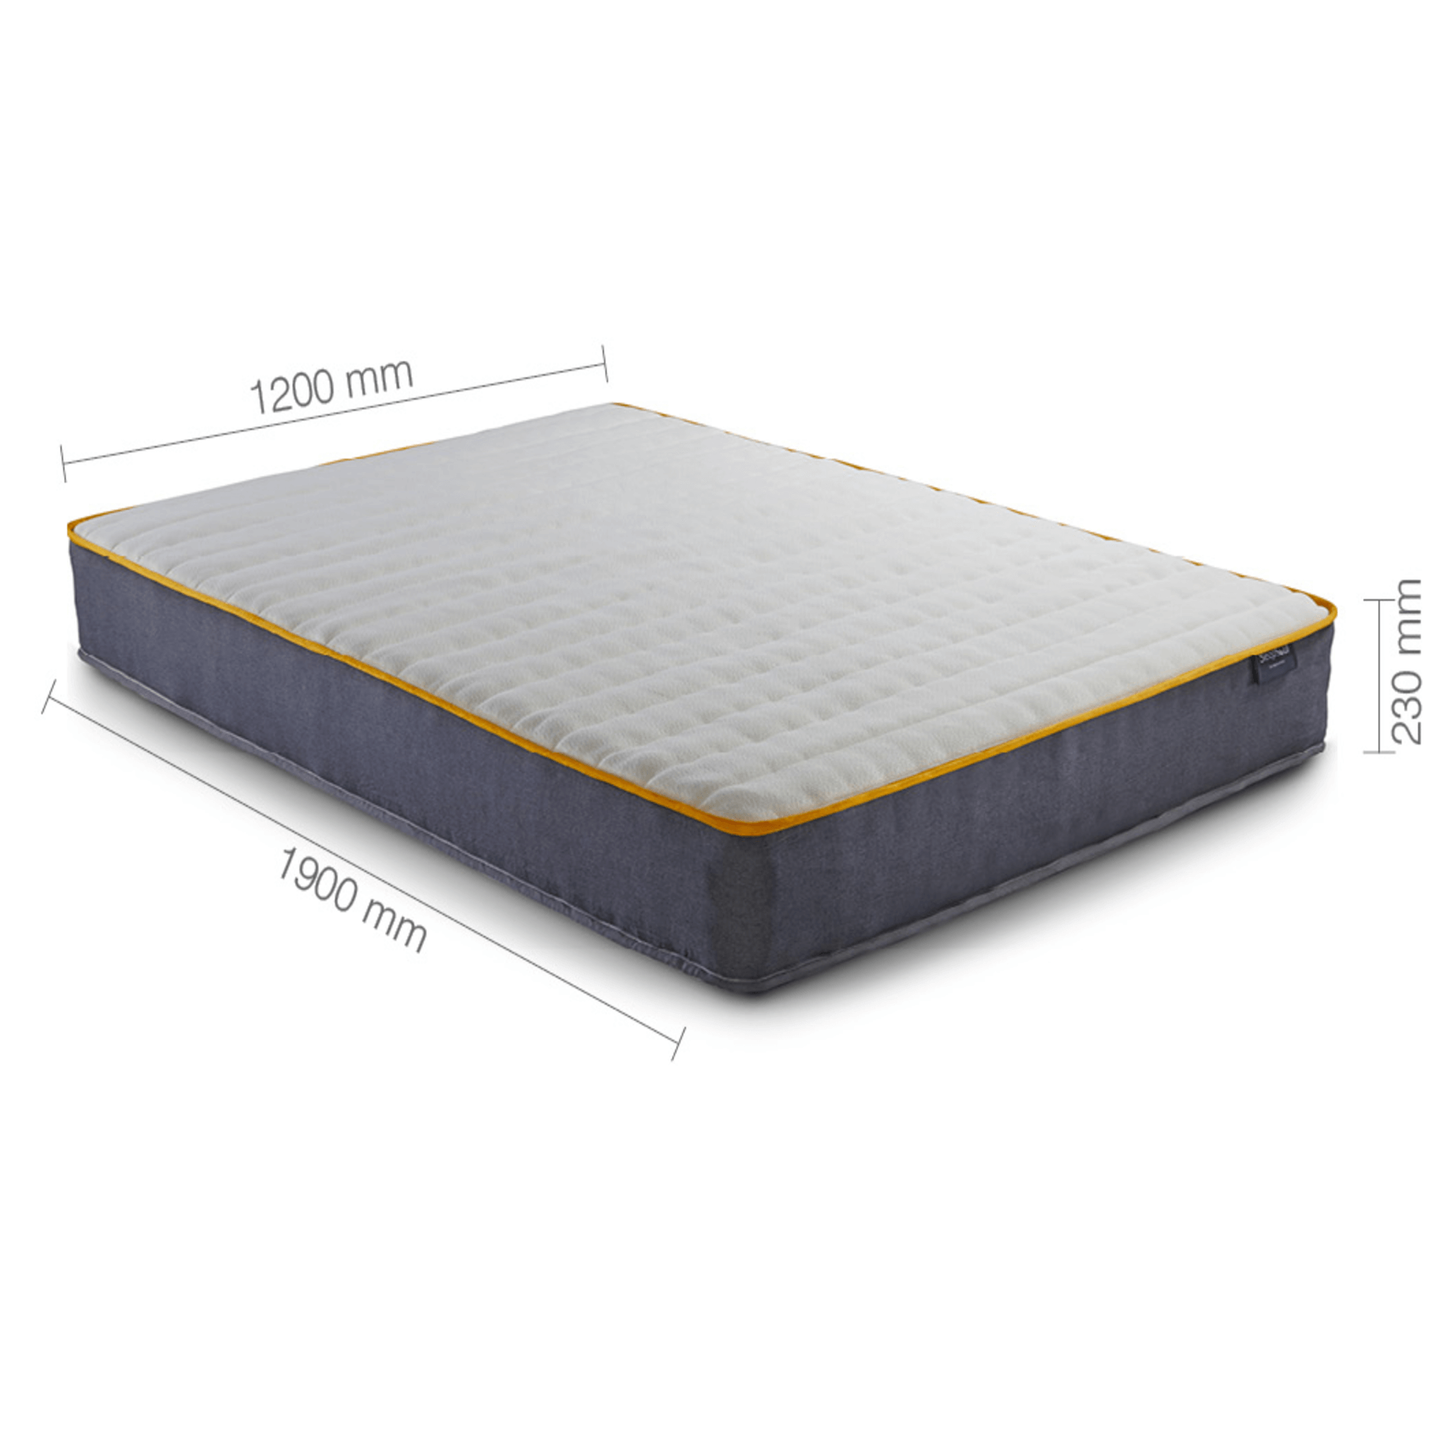 SleepSoul comfort 800 pocket spring small double mattress dimensions